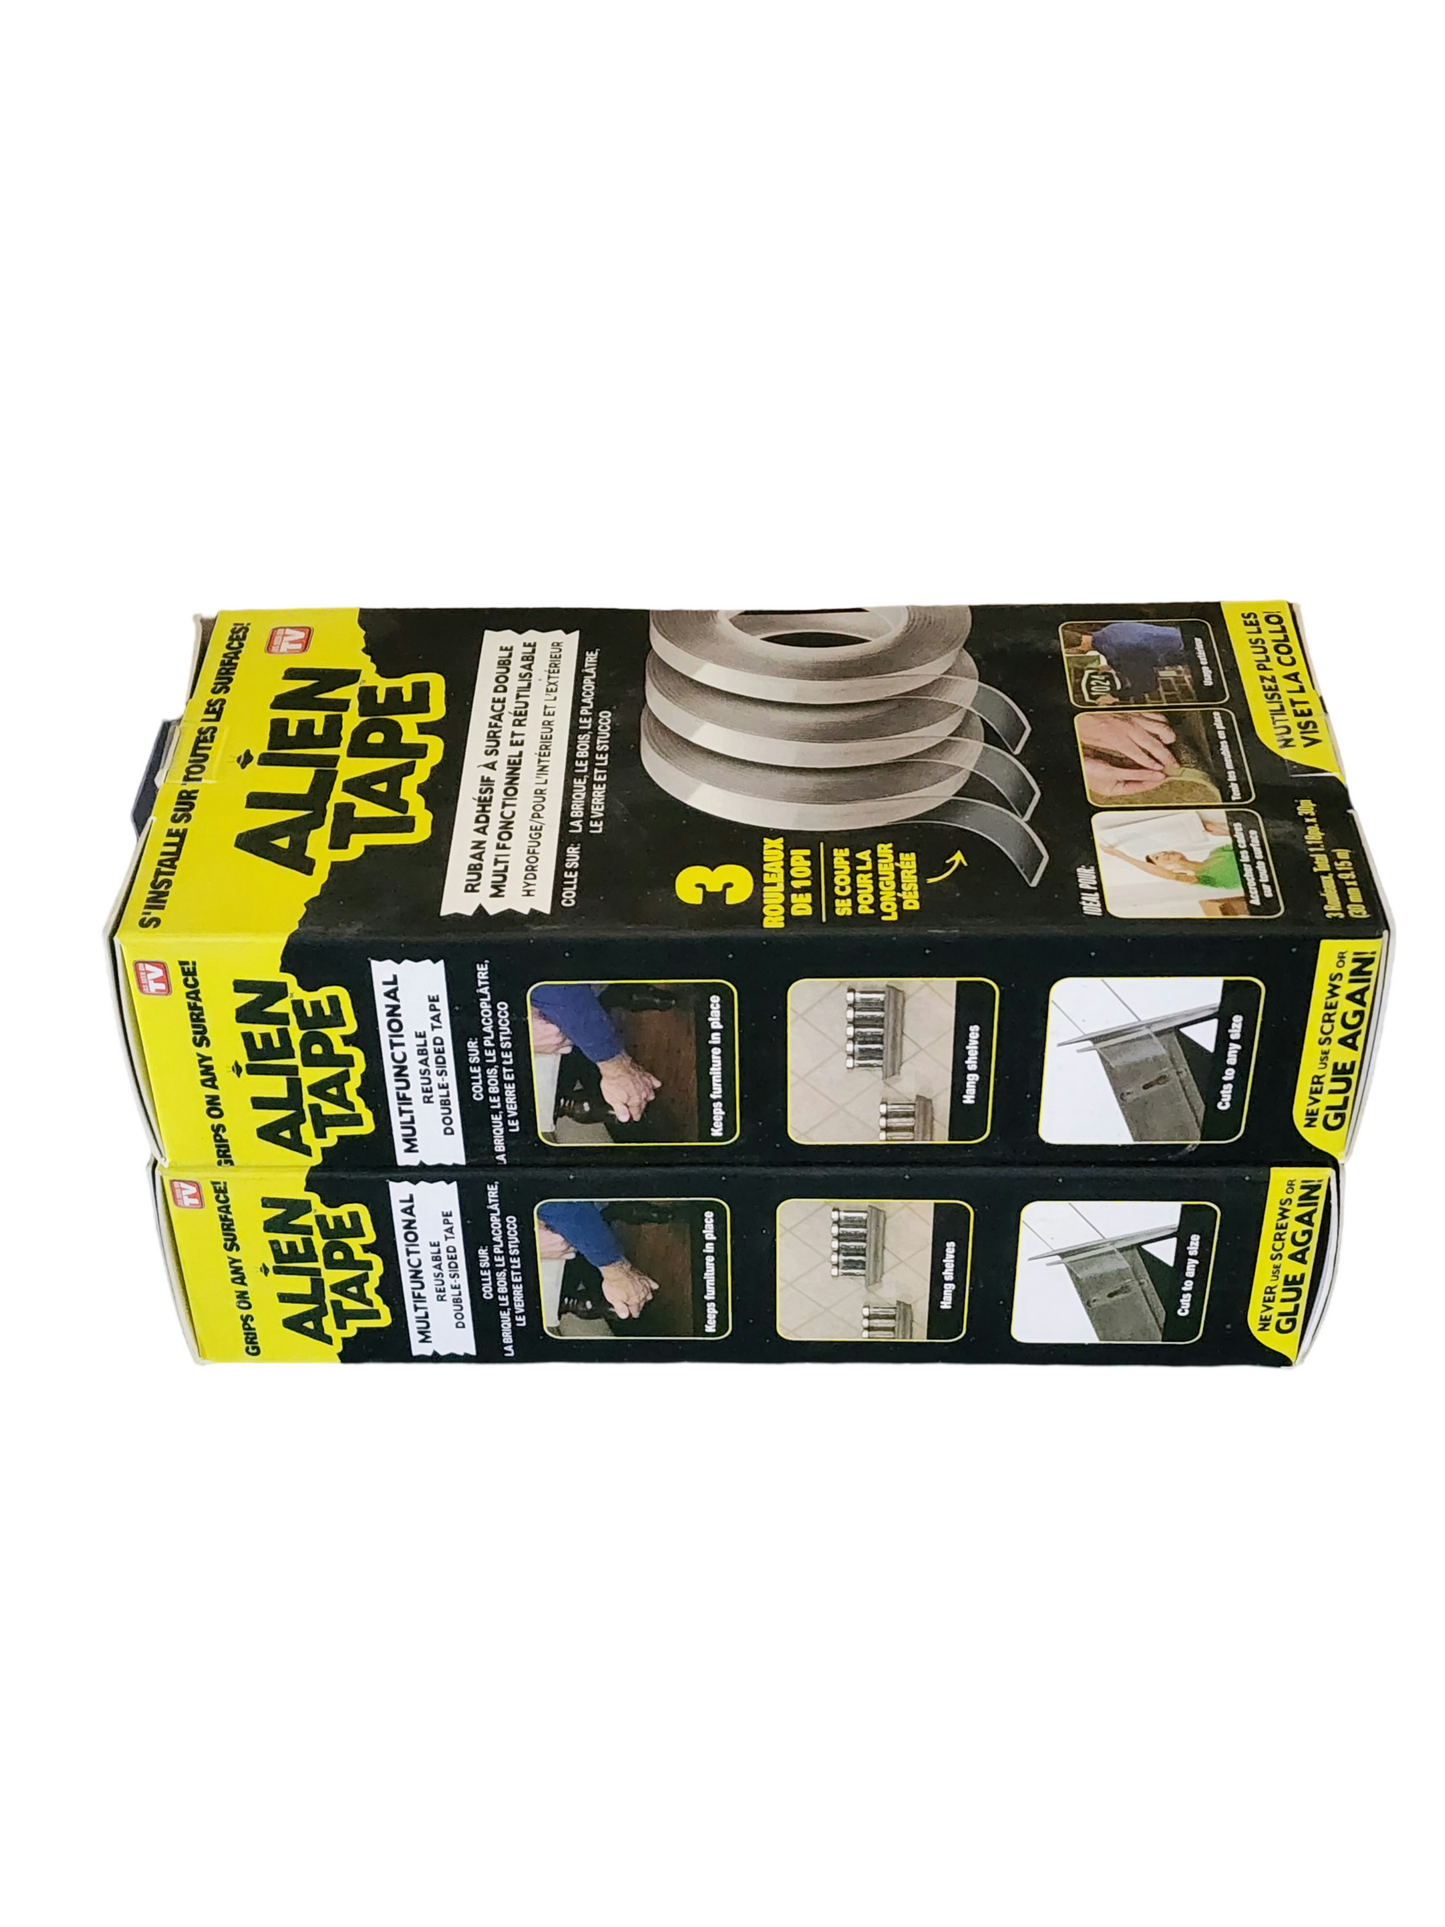 Two Alien Tape  Brand 3-Packs 1.18-in x 10-ft Double-Sided Tape. 6 Rolls Total.